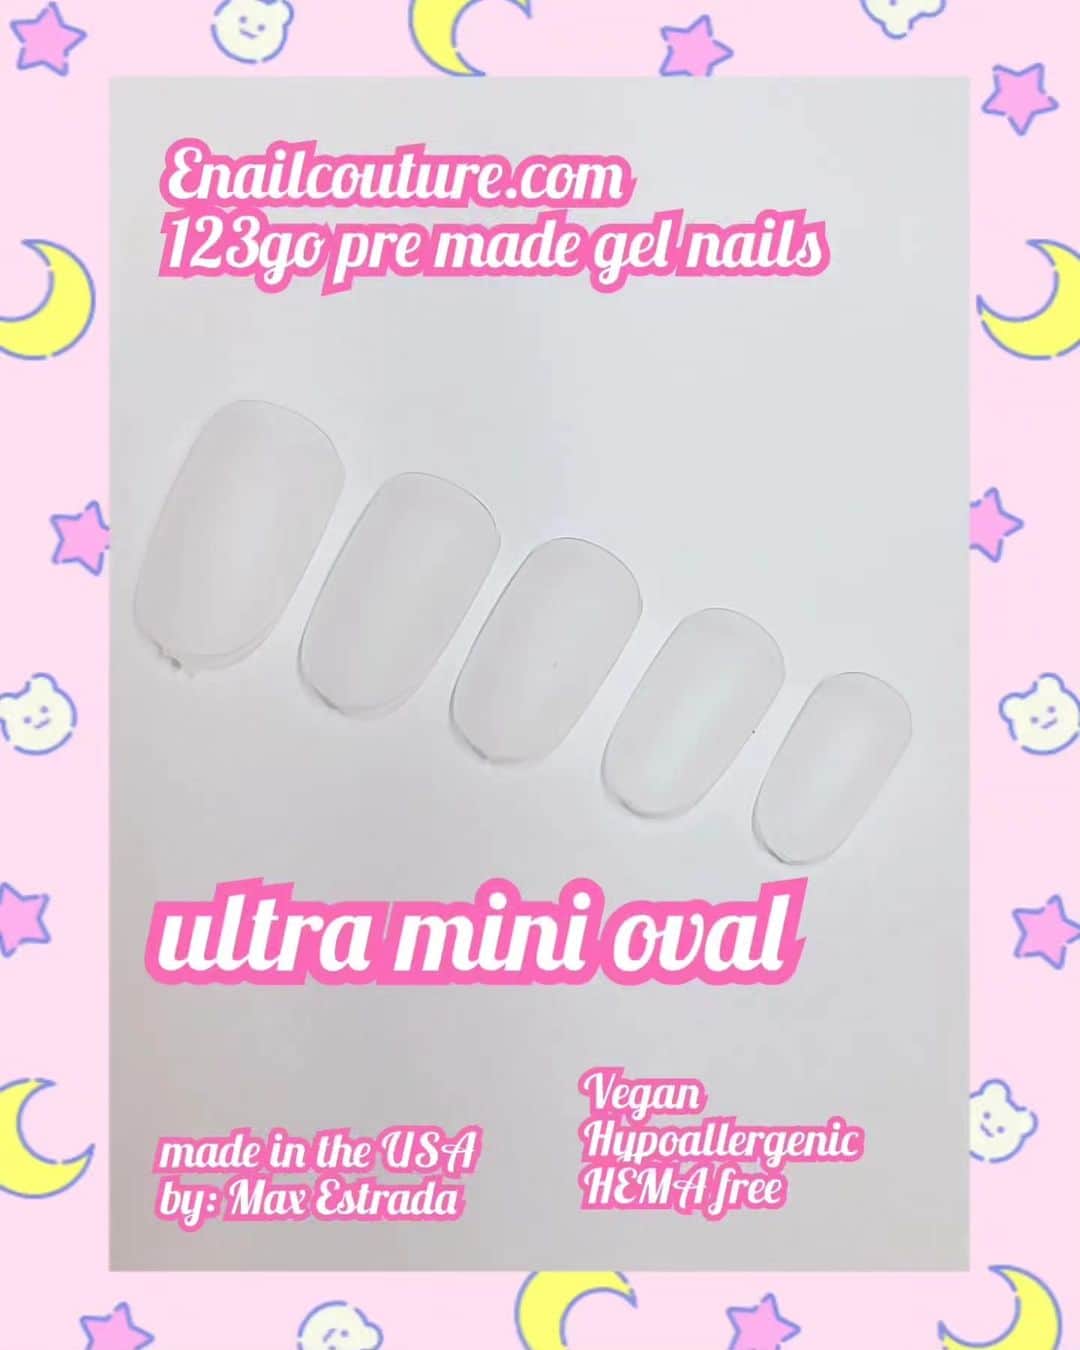 Max Estradaさんのインスタグラム写真 - (Max EstradaInstagram)「Enailcouture.com 30% off promo code: spring30 Enailcouture.com new racer clear fast dry acrylic ☆ Enailcouture.com new hologram power gel,  unicorn chrome pigments magic gel☆ one coat over any color for a dazzling effect♡ Enailcouture.com new 123go bubble gum gel,  solid glue gel♡ vegan and Hypoallergenic.  Made in America 🇺🇸The moment so many have been waiting for is finally here! Enailcouture.com 123go maximum square is the longest flat boxy square pre made full coverage gel nail in the game. We also dropped xs sculpture square and magical ice hologram stickers☆Enailcouture.com 123go 5XL Coffin nails are the longest full coverage pre made gel nails in the world. They are EVERYTHING, made in America.Enailcouture.com new product drop ♡!~ 123go diy gel and our new charm nail stickers 😍Enailcouture.com made in American ♡!~Enailcouture.com 123go pre made gel nails are the game changer !~ perfect nails every time with no smells or dust!~ long lasting and easy removal , made in America! Enailcouture.com  #ネイル #nailpolish #nailswag #nailaddict #nailfashion #nailartheaven #nails2inspire #nailsofinstagram #instanails #naillife #nailporn #gelnails #gelpolish #stilettonails #nailaddict #nail #💅🏻 #nailtech#nailsonfleek #nailartwow #네일아트 #nails #nailart #notd #makeup #젤네일  #glamnails #nailcolor  #nailsalon #nailsdid #nailsoftheday Enailcouture.com」4月20日 1時50分 - kingofnail